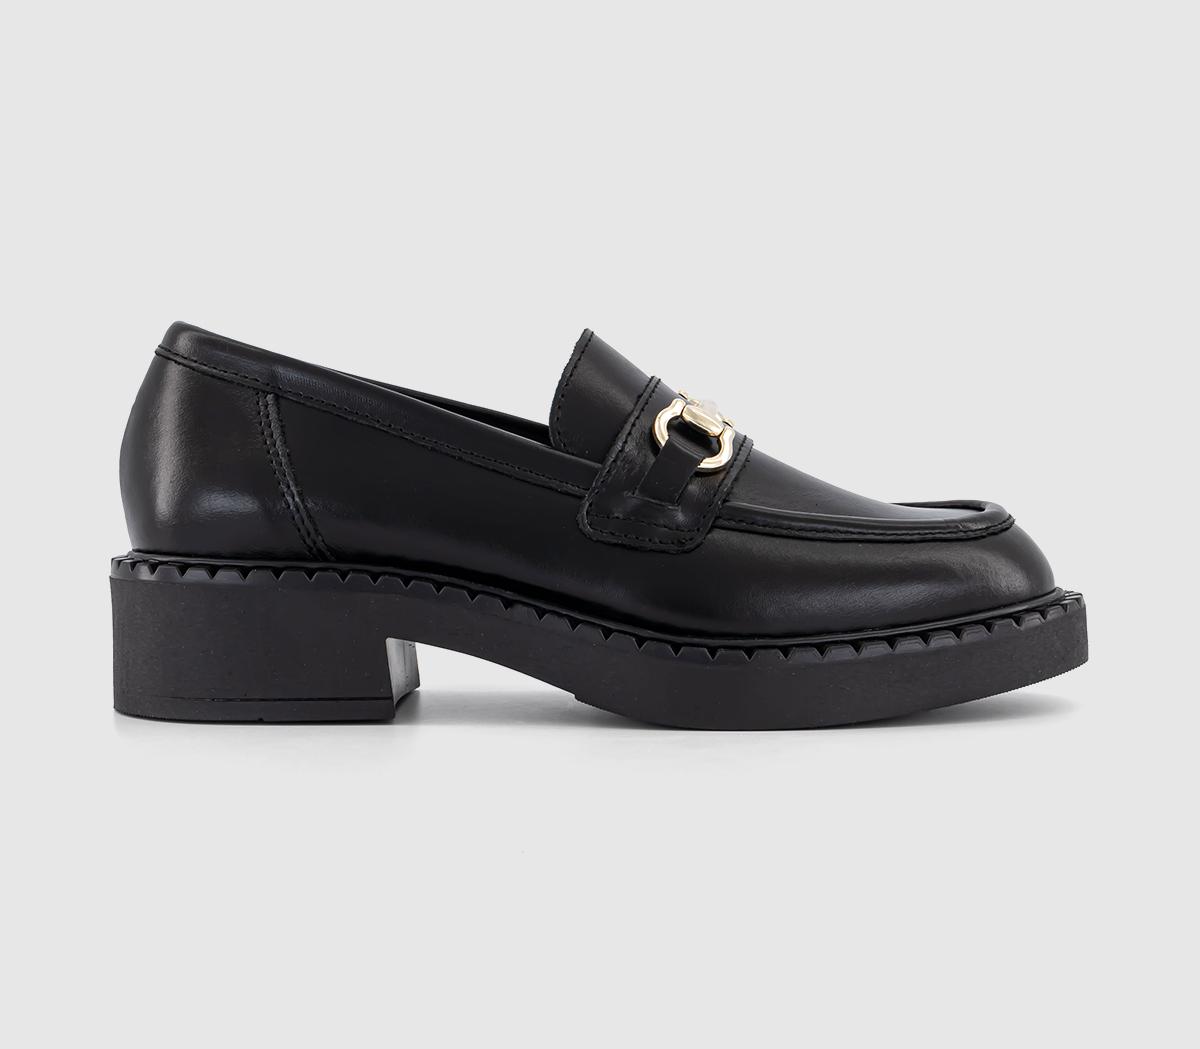 OFFICEFuture Chunky Hardware LoafersBlack Leather